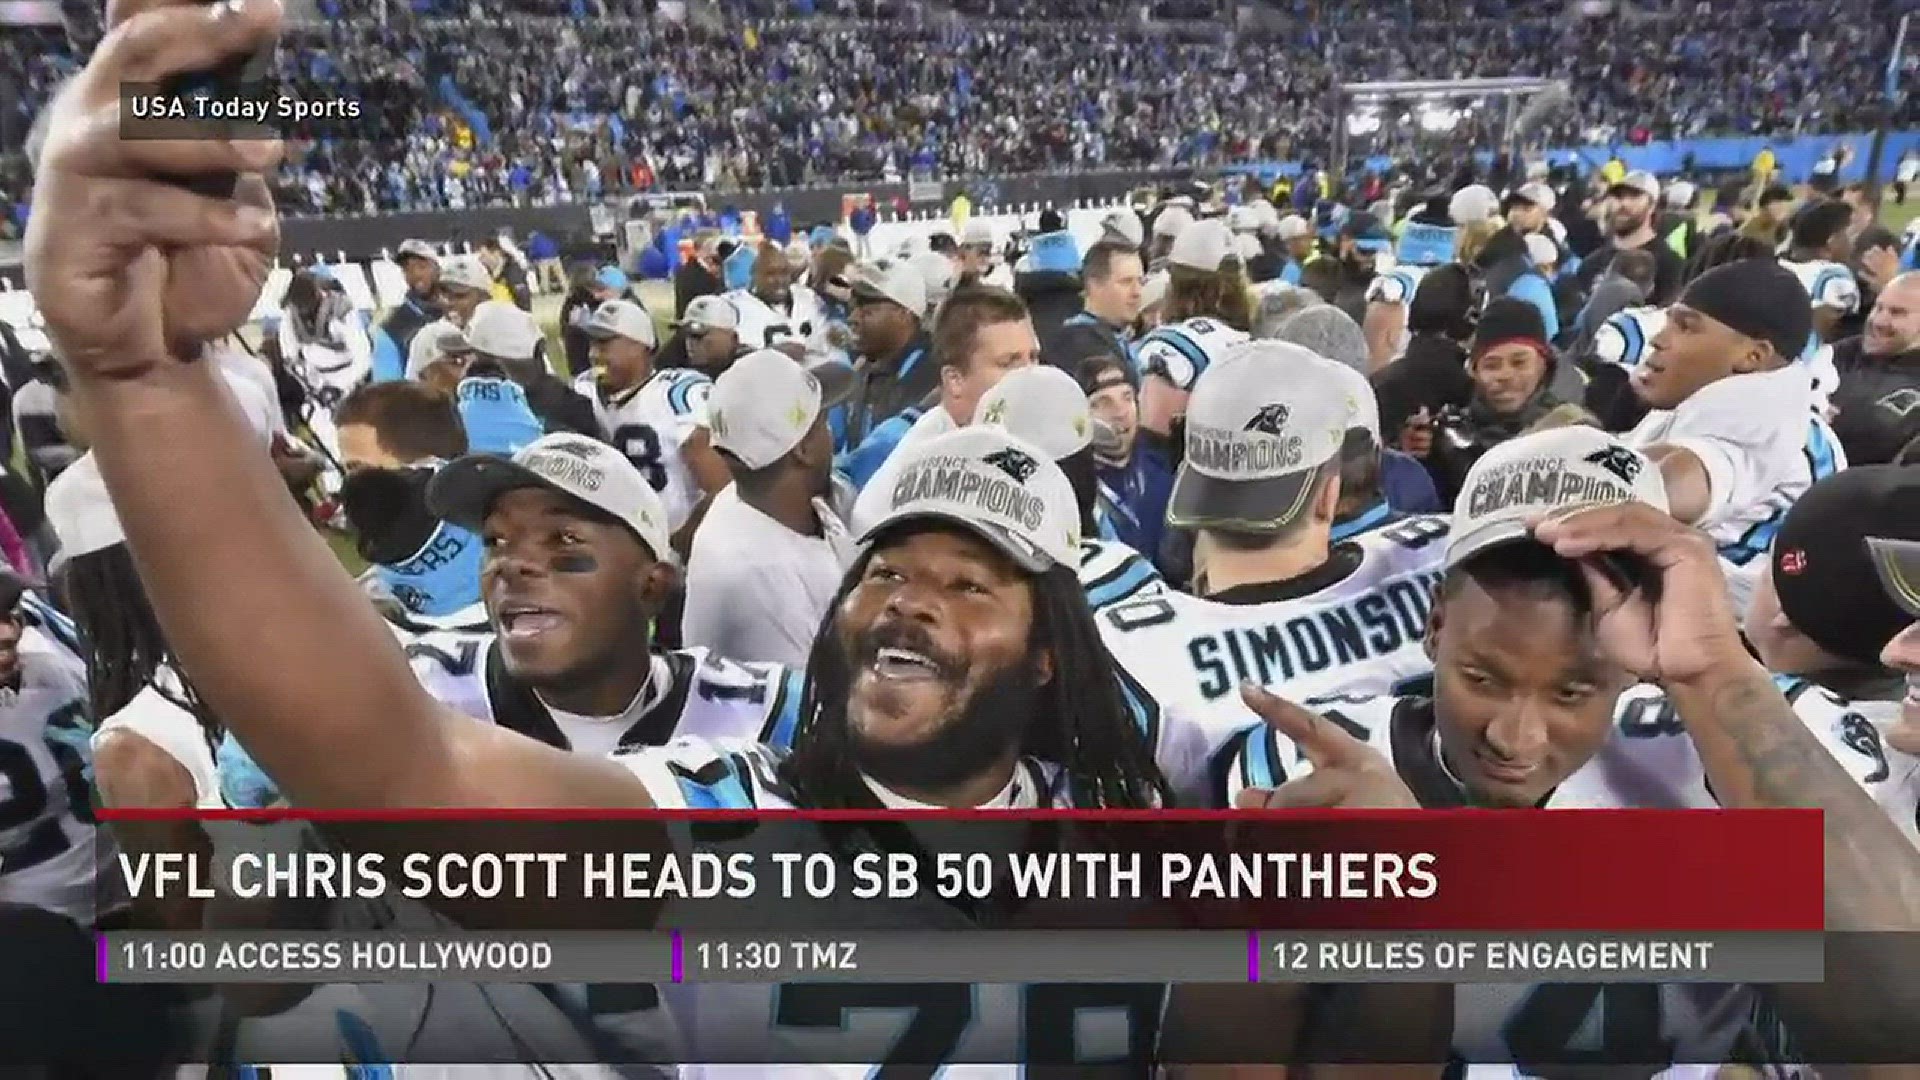 Former Vol Chris Scott will play in Super Bowl 50 with the Panthers